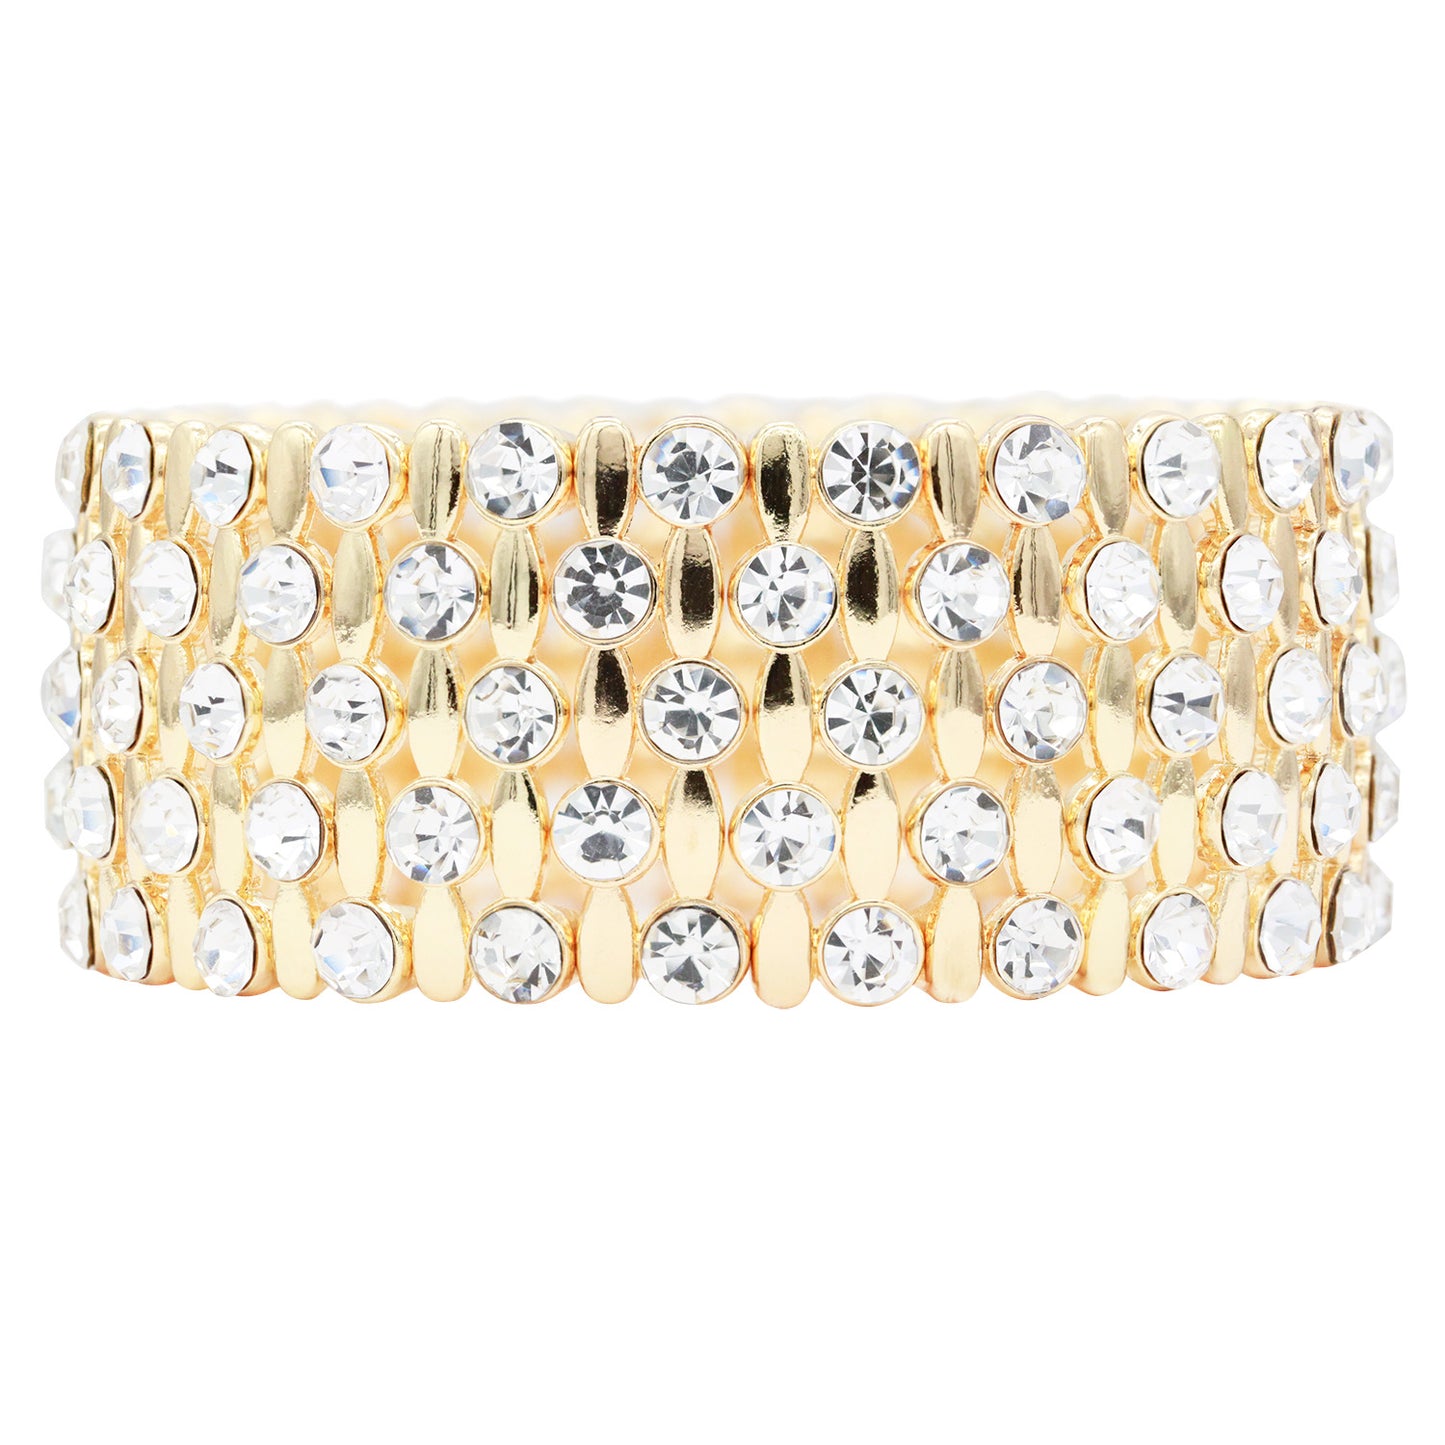 Lavencious Classic Design Elastic Stretch Bracelet Paved with Rhinestones Bridal Wedding Jewelry for Women 7"(Gold)